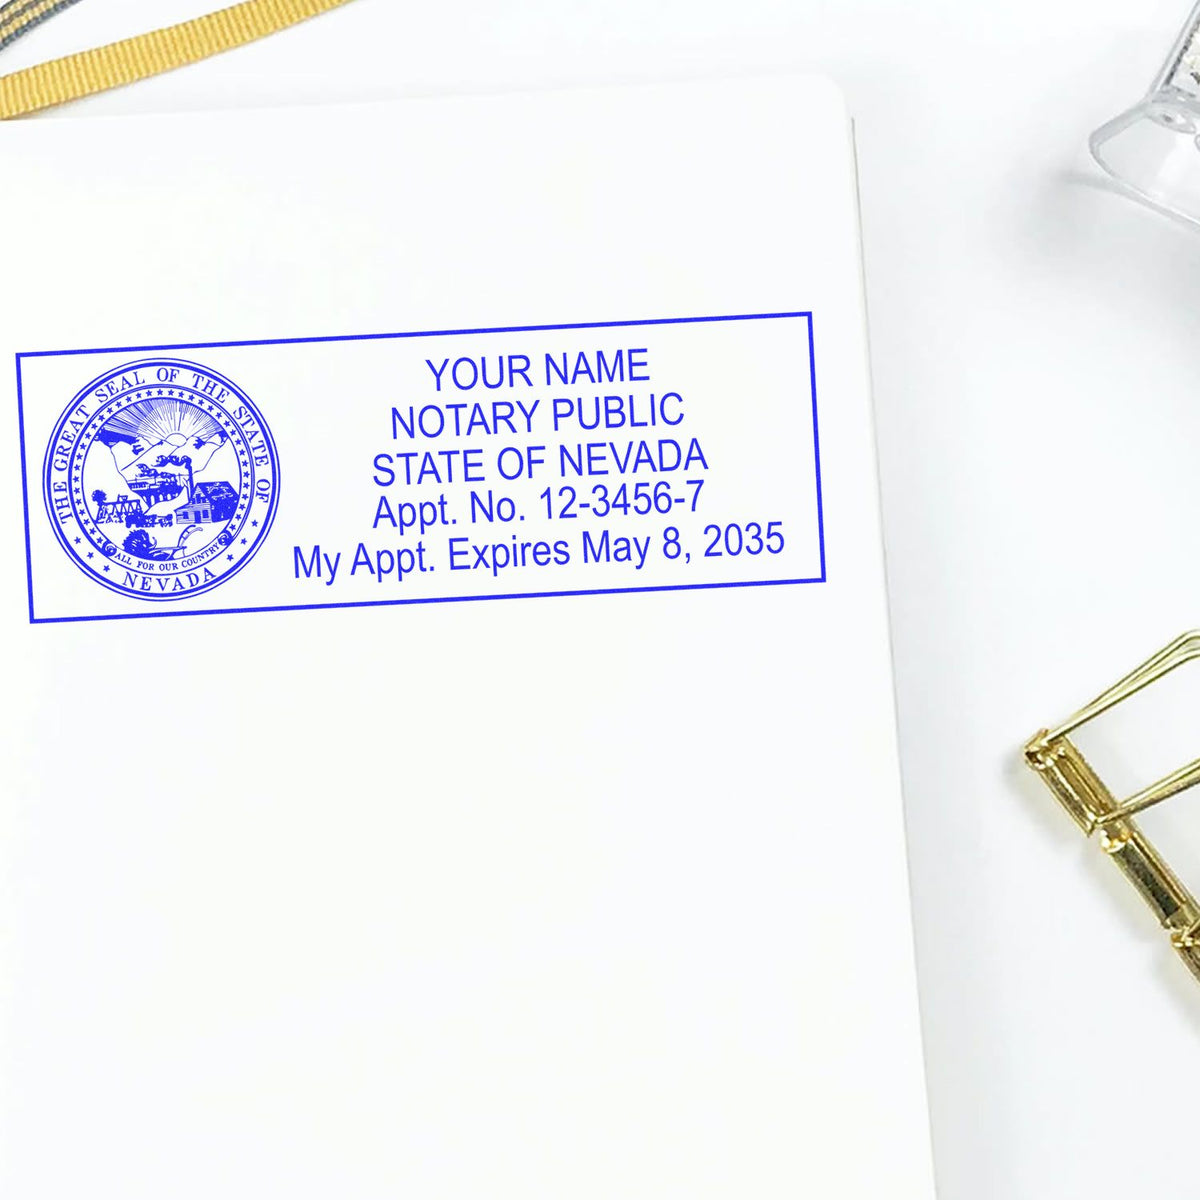 An alternative view of the Super Slim Nevada Notary Public Stamp stamped on a sheet of paper showing the image in use